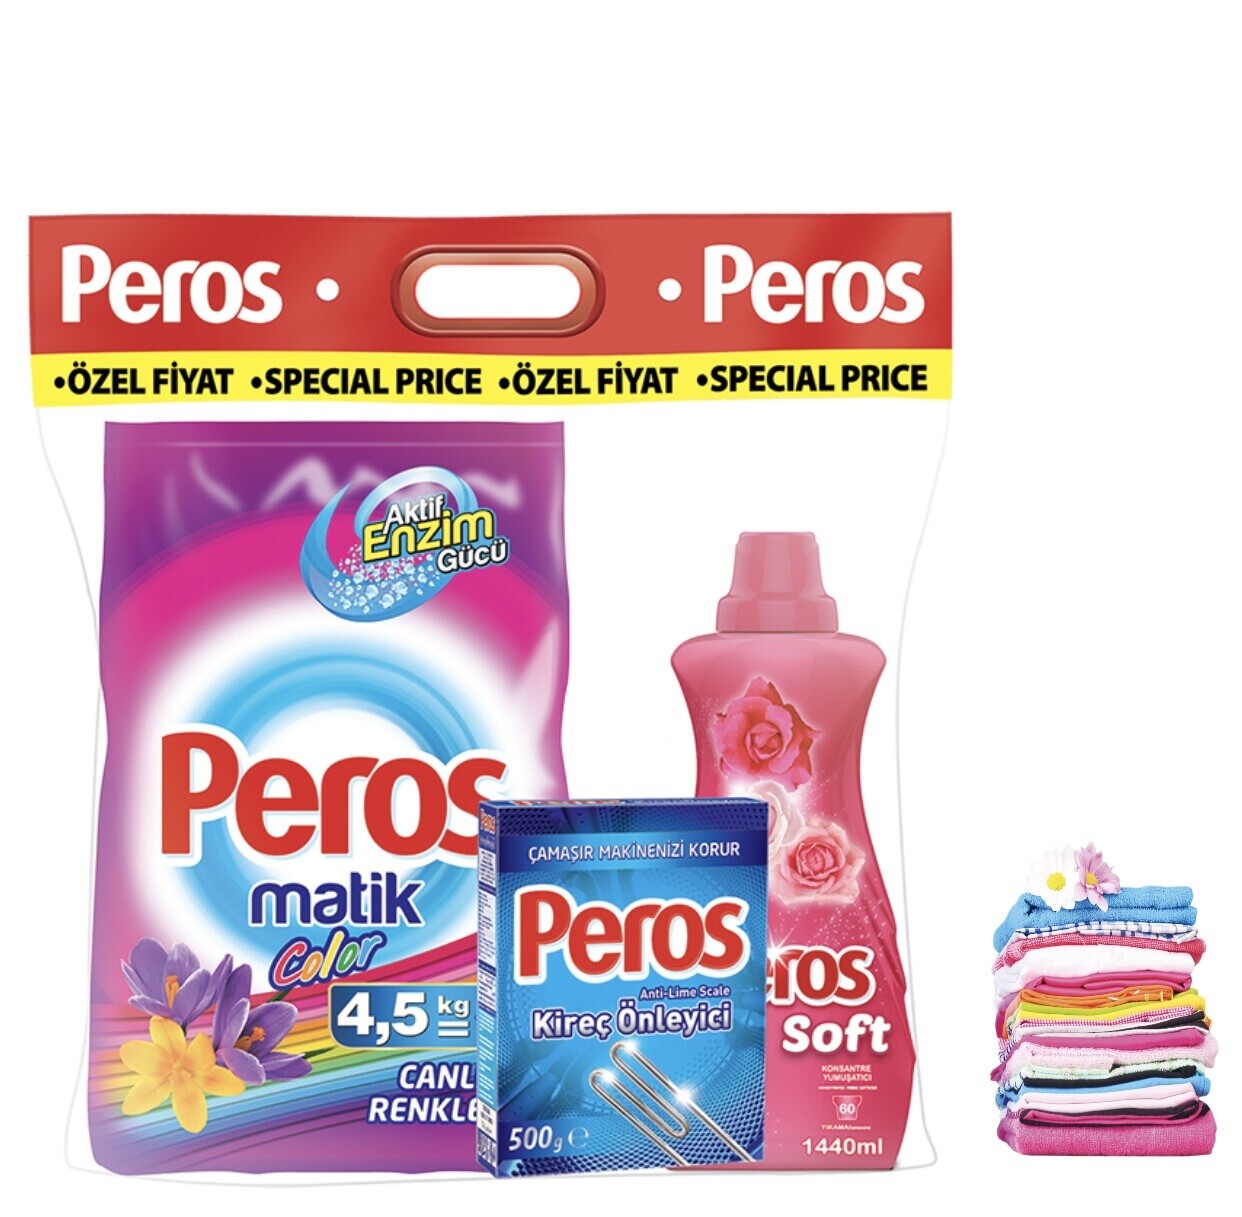 Peros Combo Offer (1)